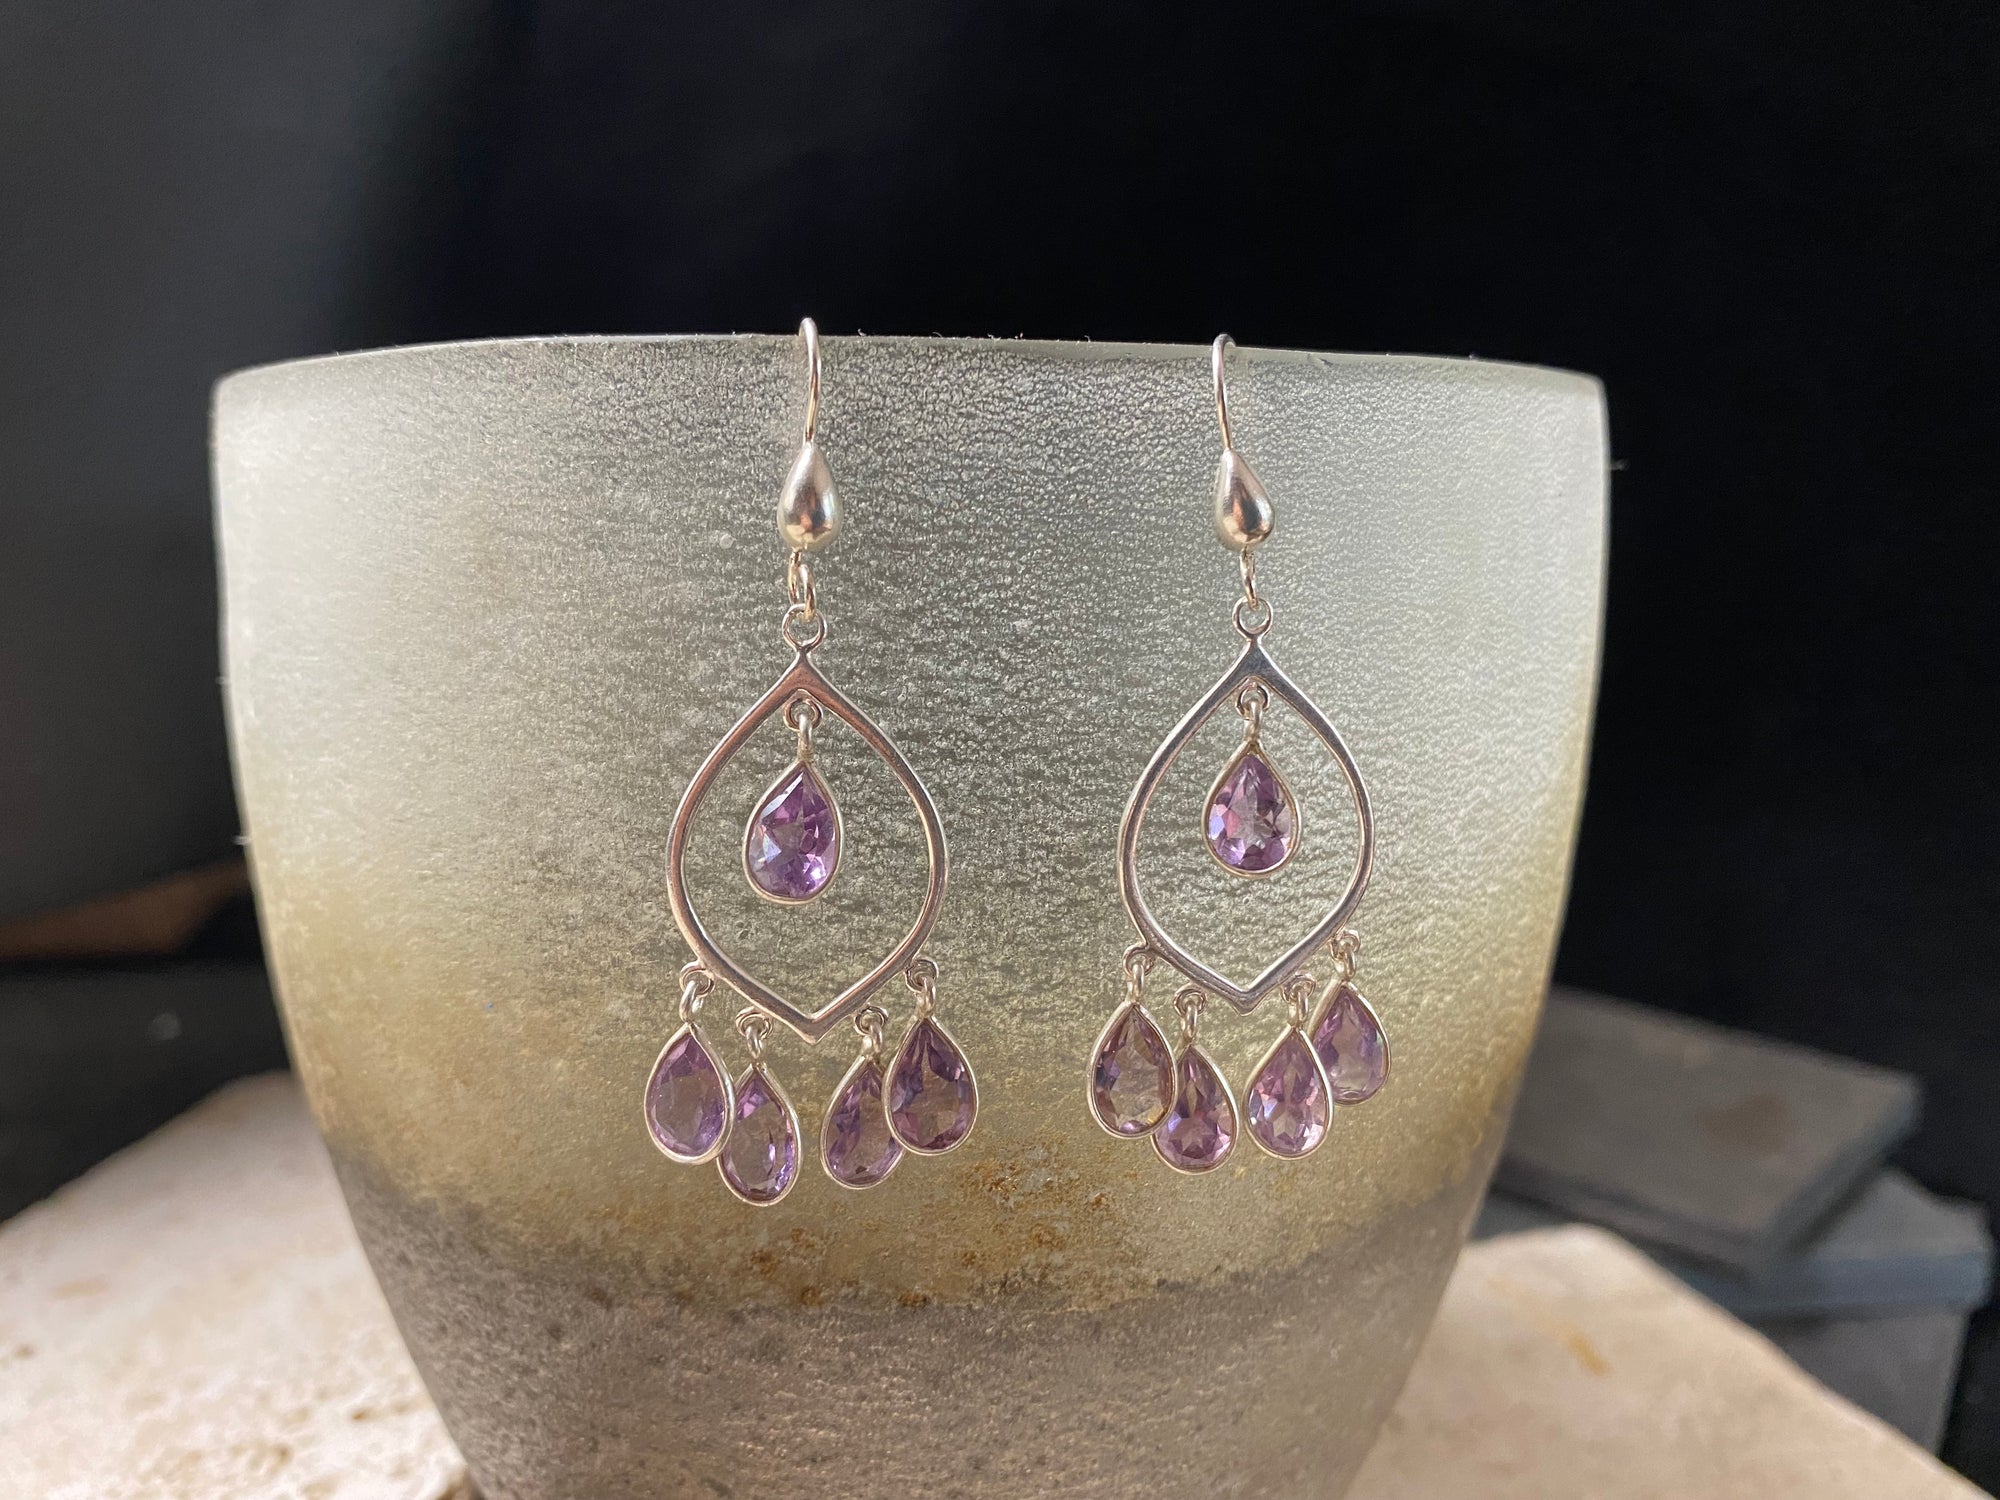 Classic amethyst drop earrings set in sterling silver, 5.2 cm length, lightweight and easy to wear